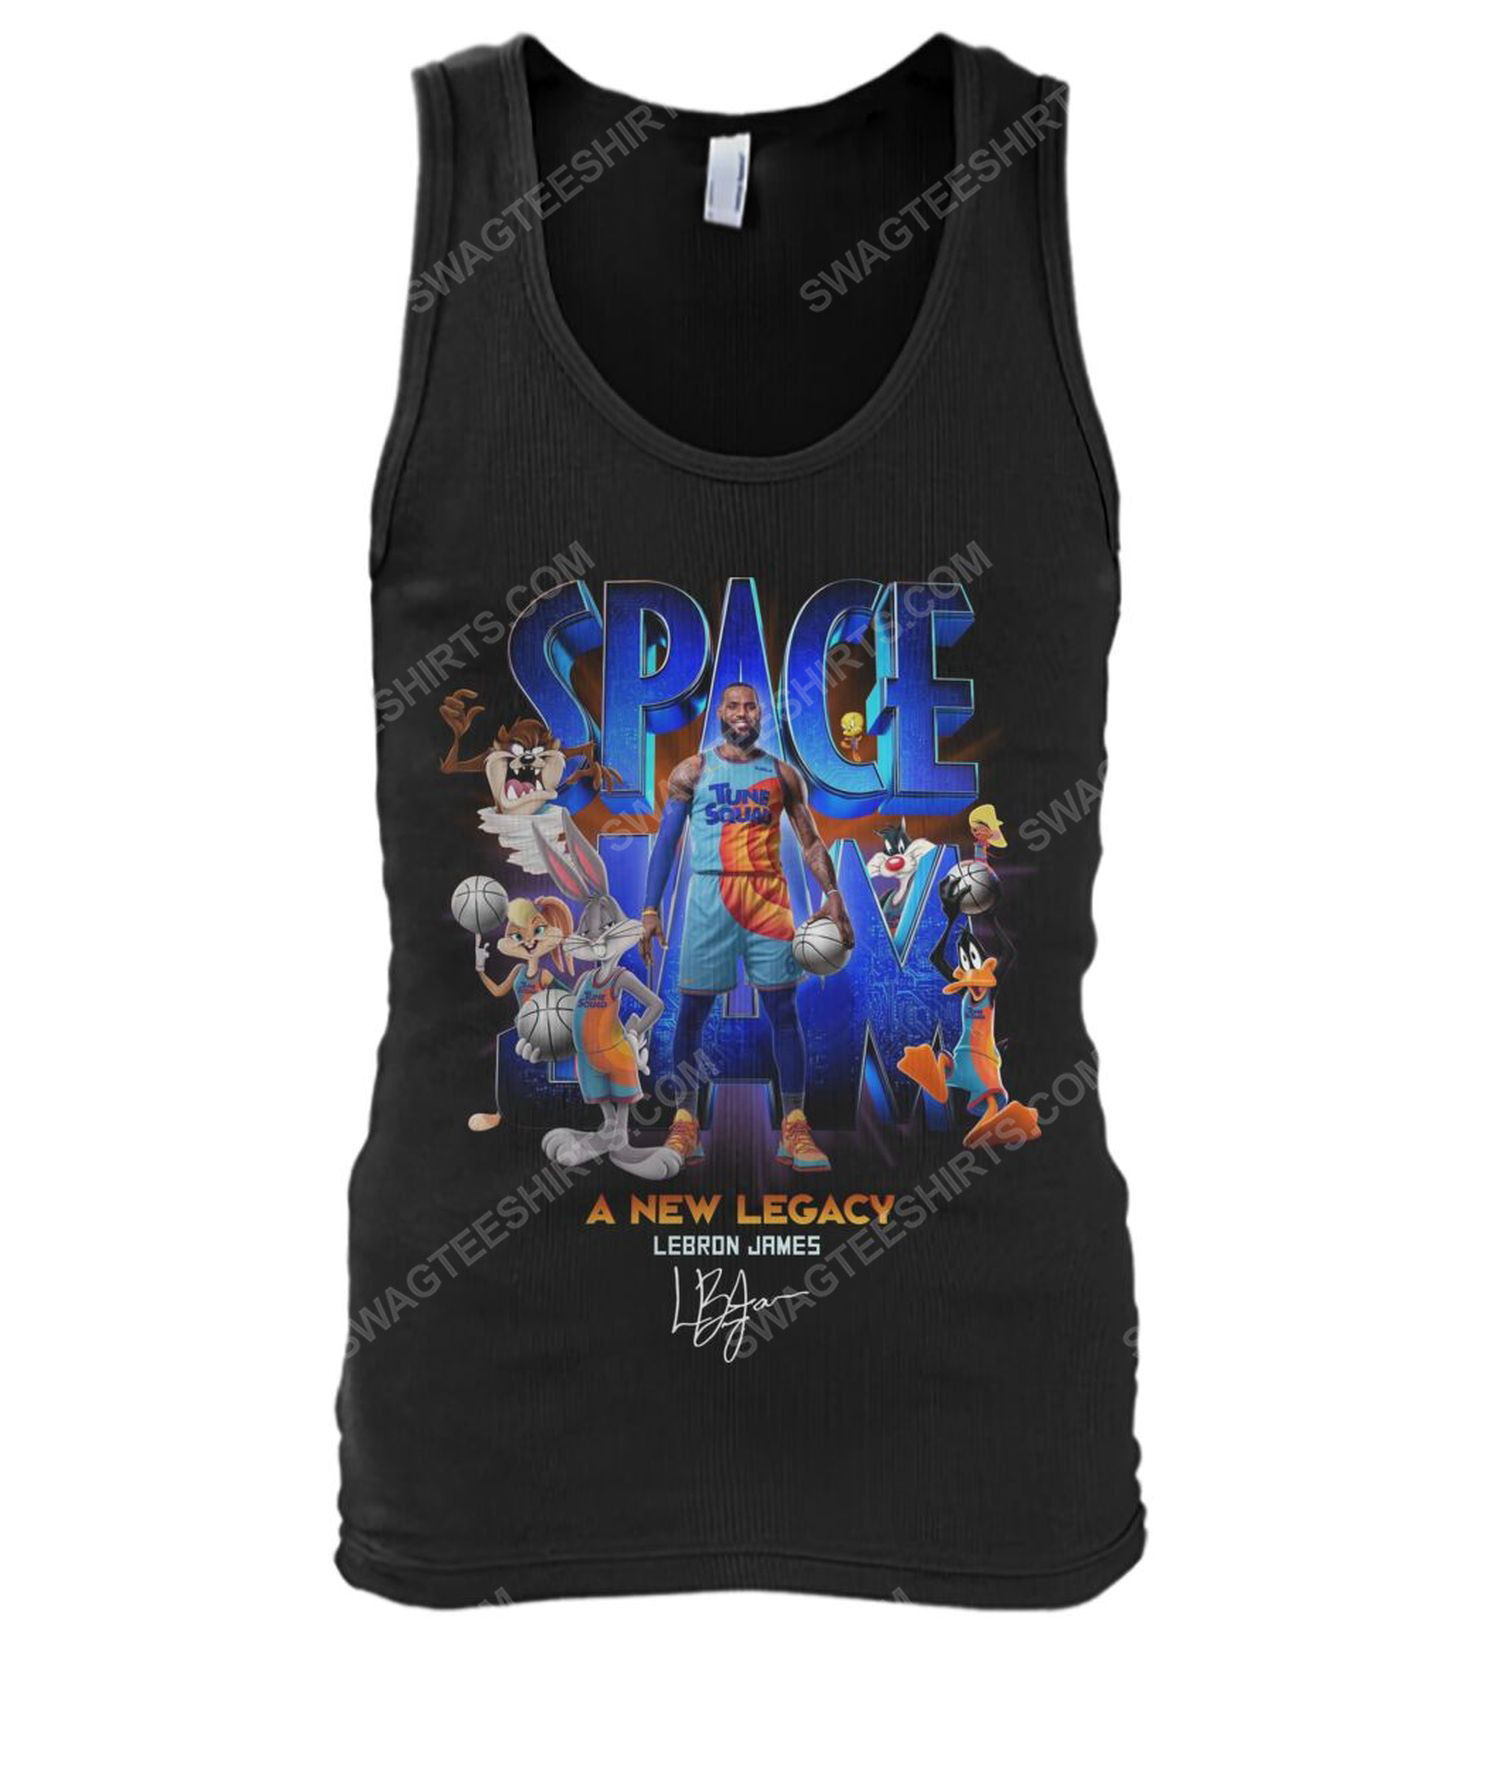 Space jam a new legacy lebron james tank top